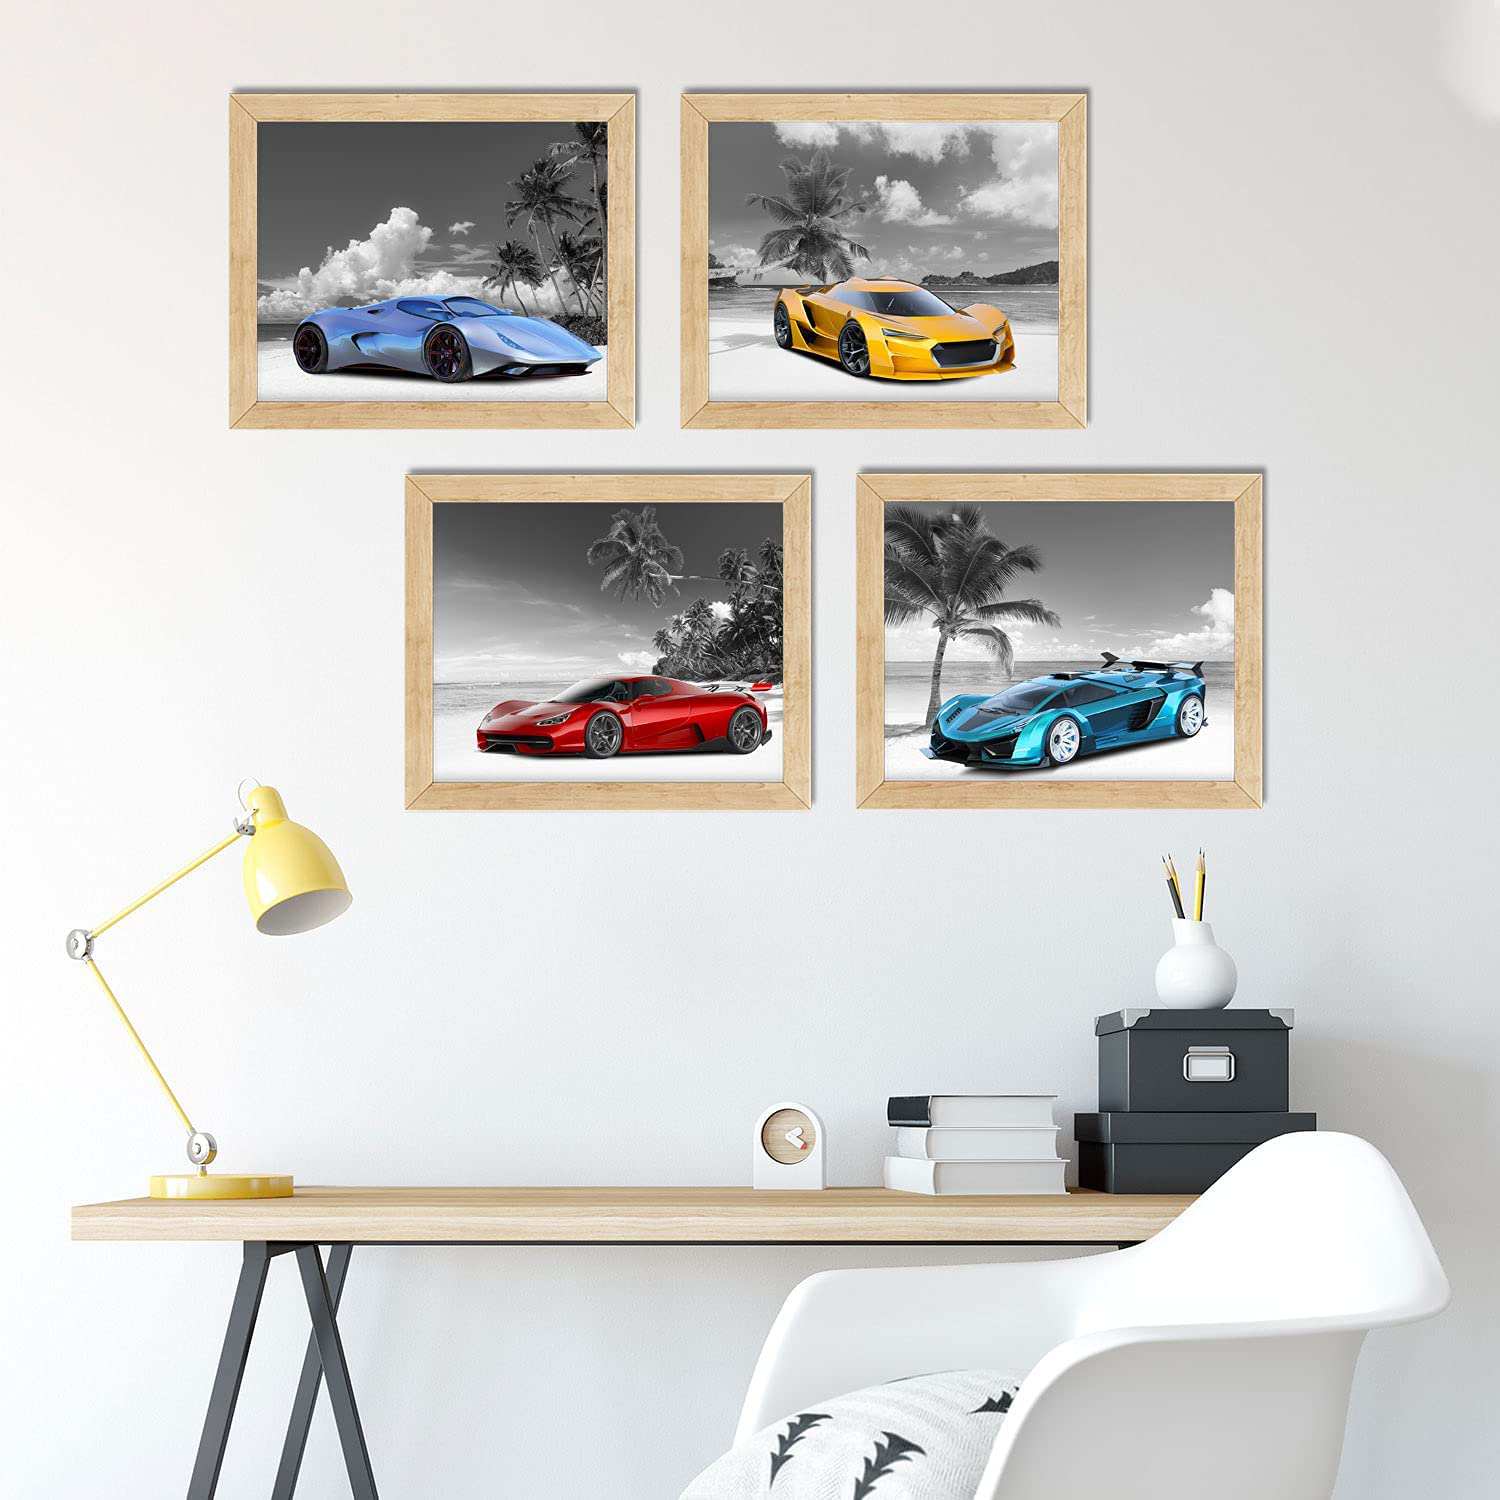 Greyscale Beach Car Poster, Car Posters for Boys Room & Car Wall Art - Set of 4 (8x10in) Car Art Prints, Boys Room Decor Teen Men - Car Room Decor, Car Wall Decor Unframed Posters For Boys Room